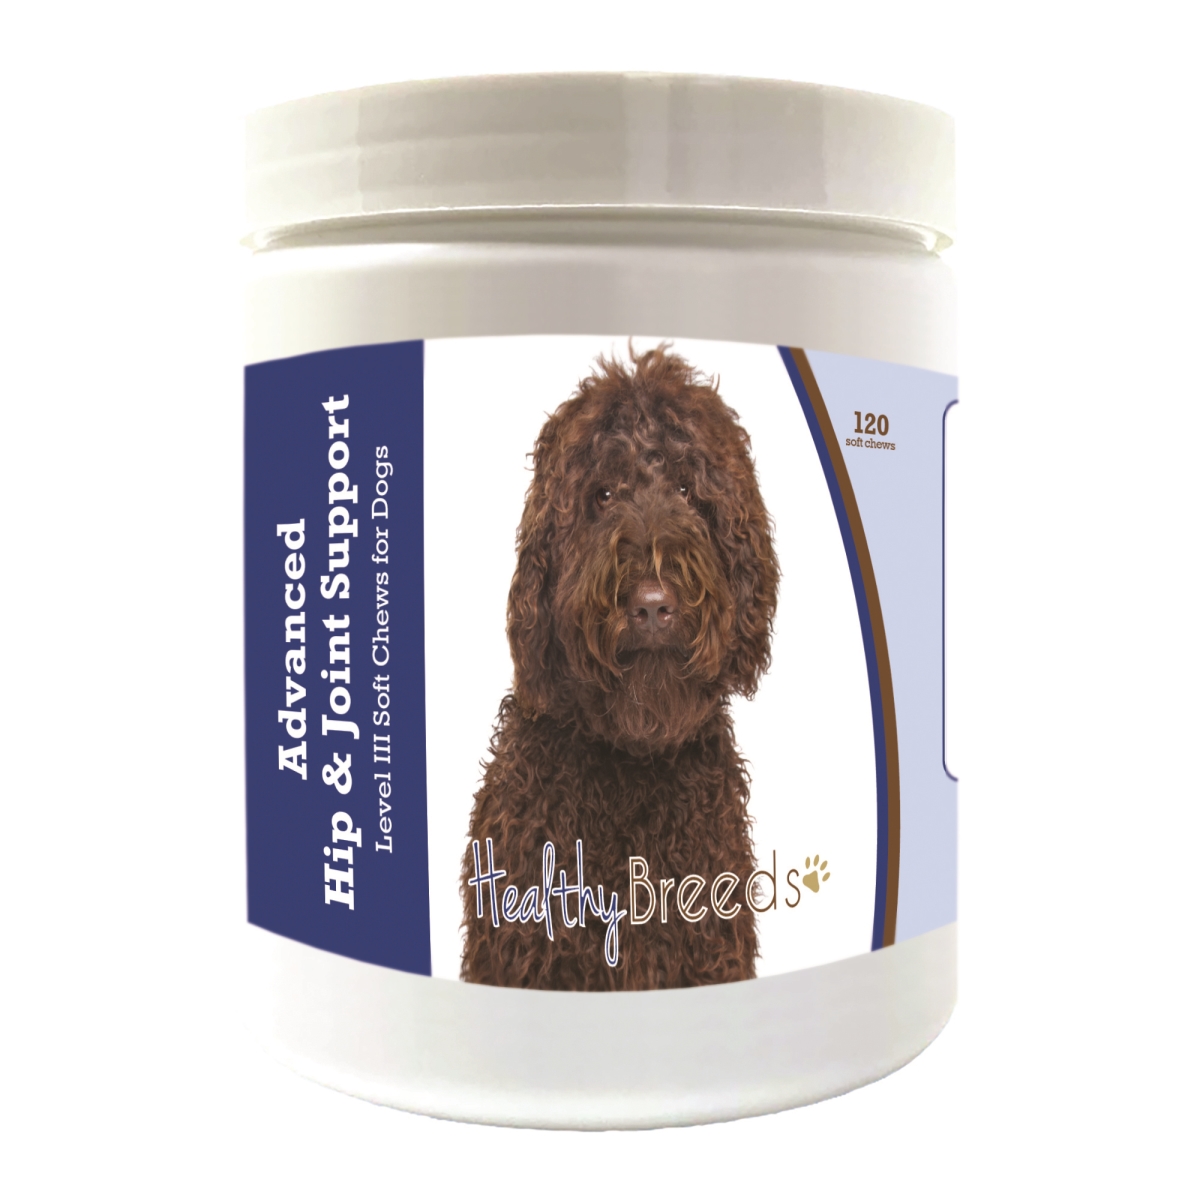 Picture of Healthy Breeds 192959898606 Labradoodle Advanced Hip & Joint Support Level III Soft Chews for Dogs